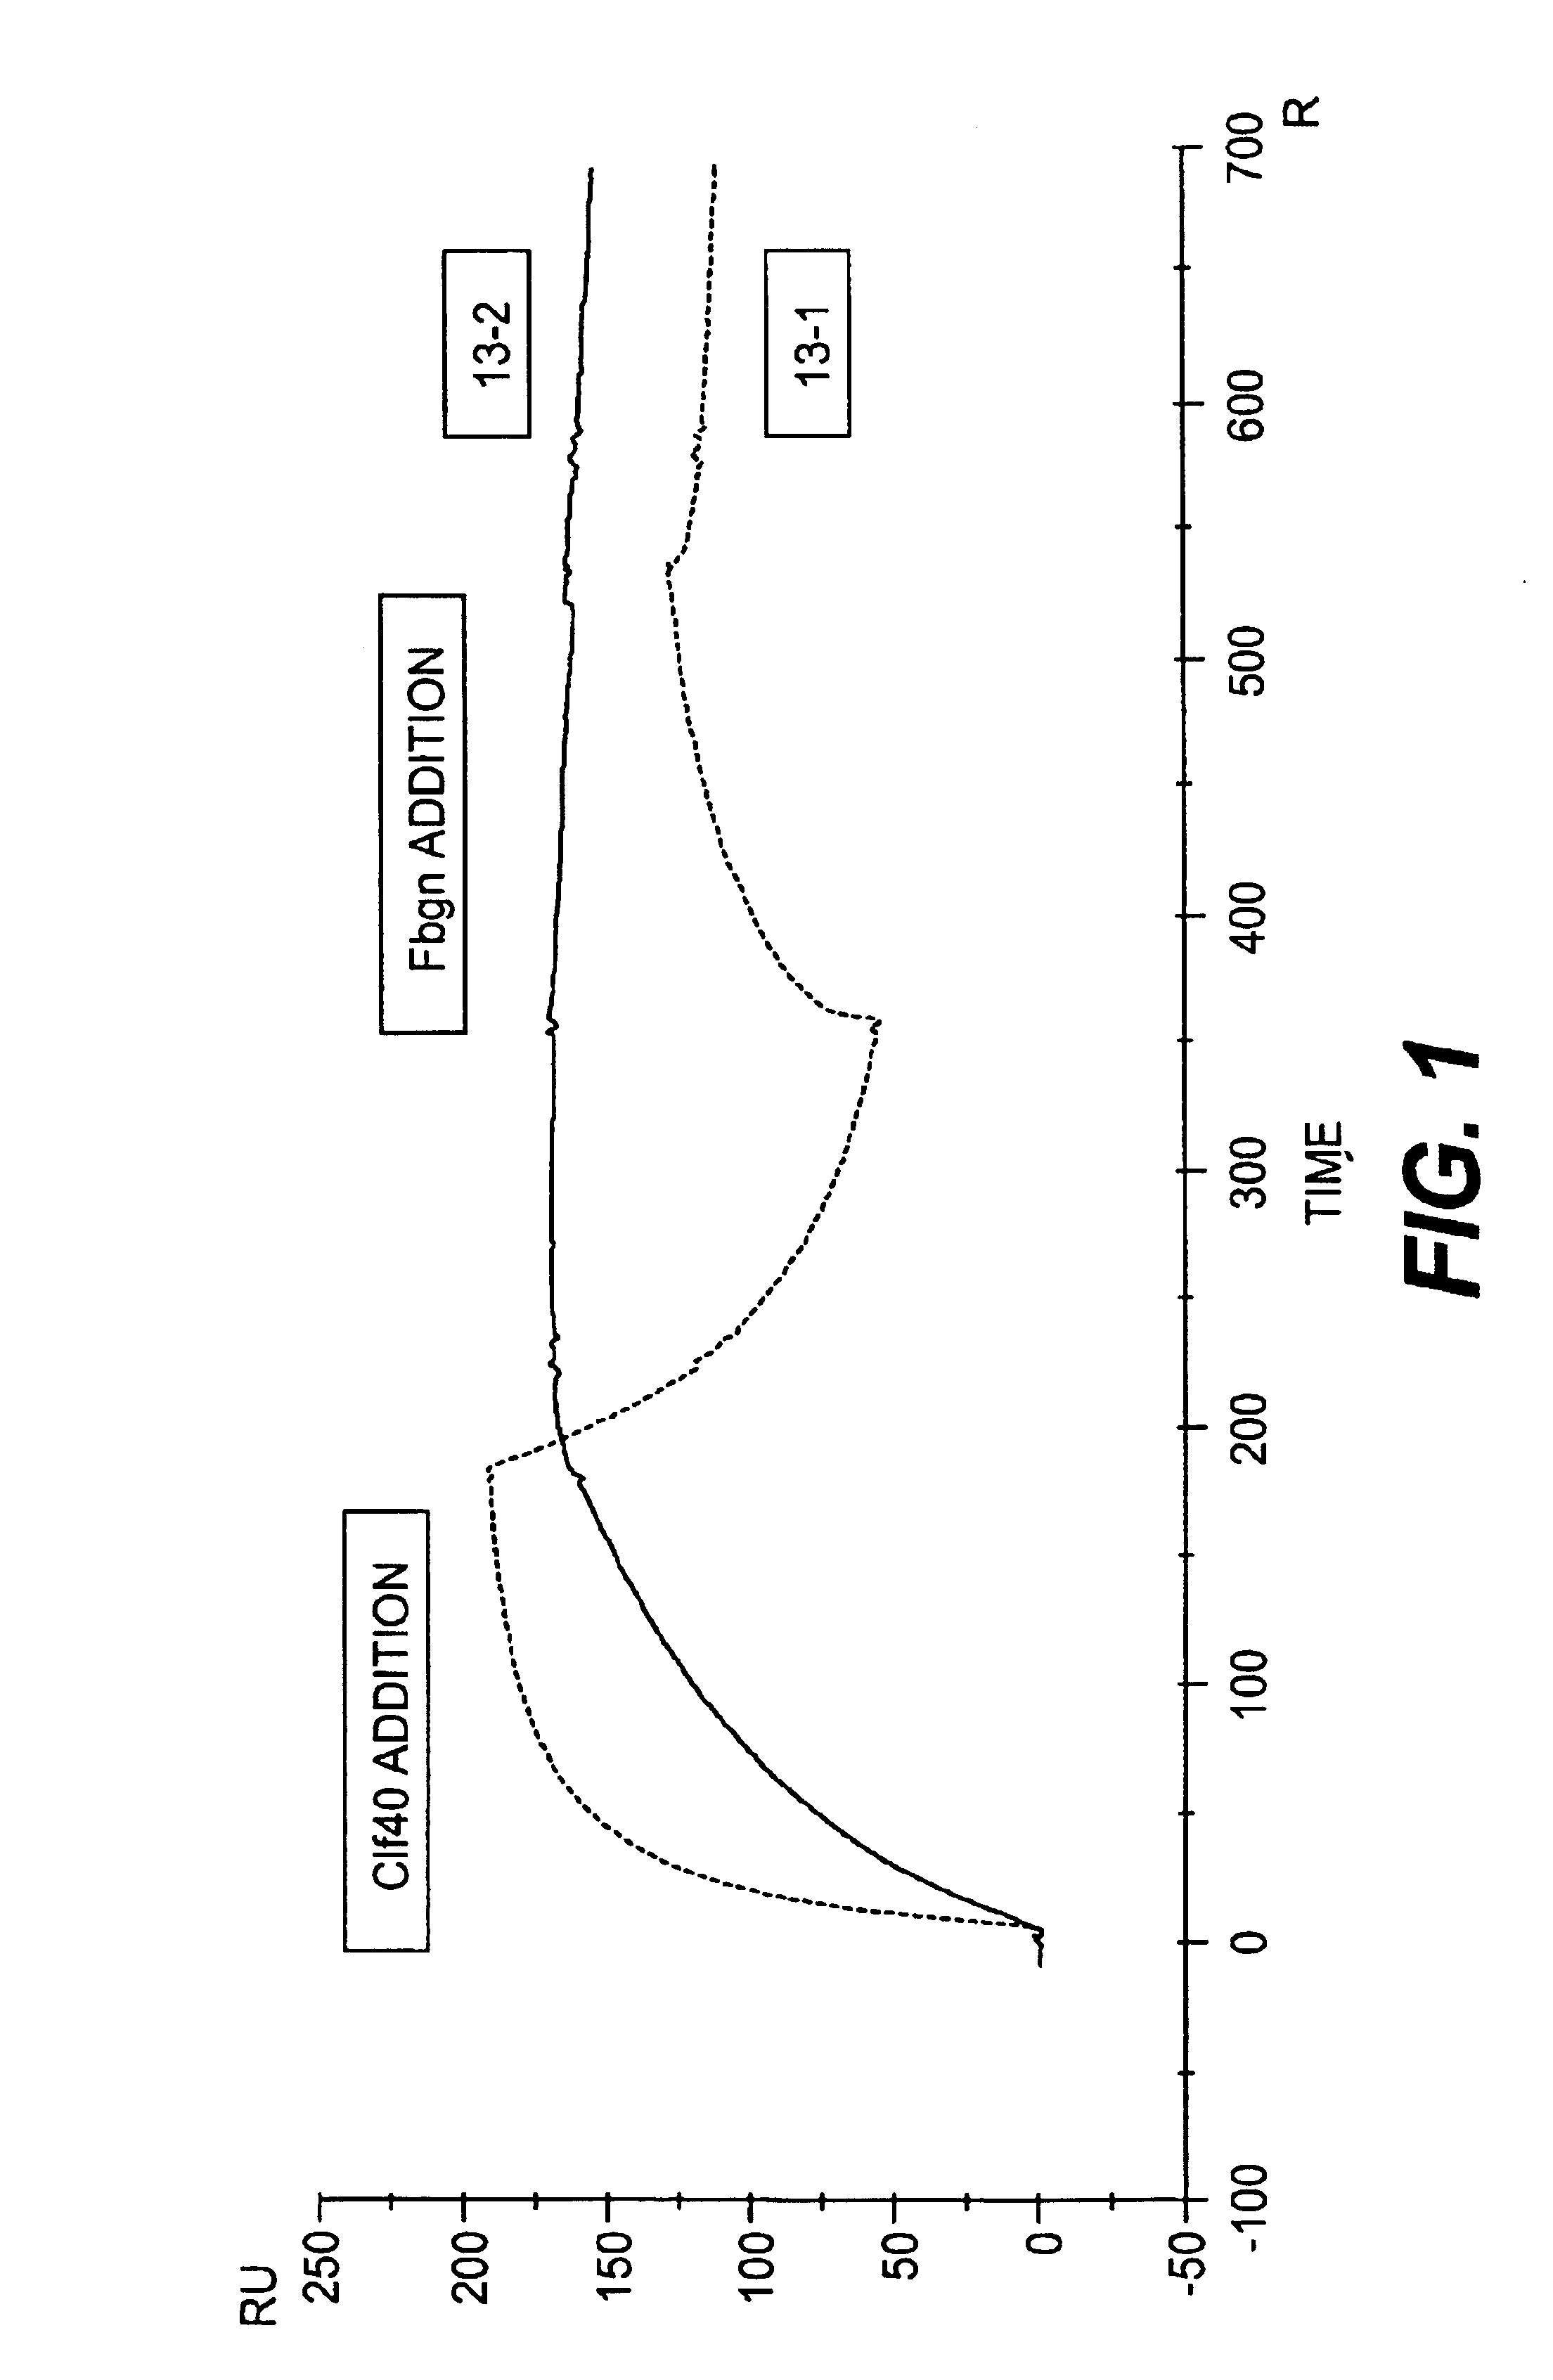 Monoclonal antibodies to the ClfA protein and method of use in treating or preventing infections